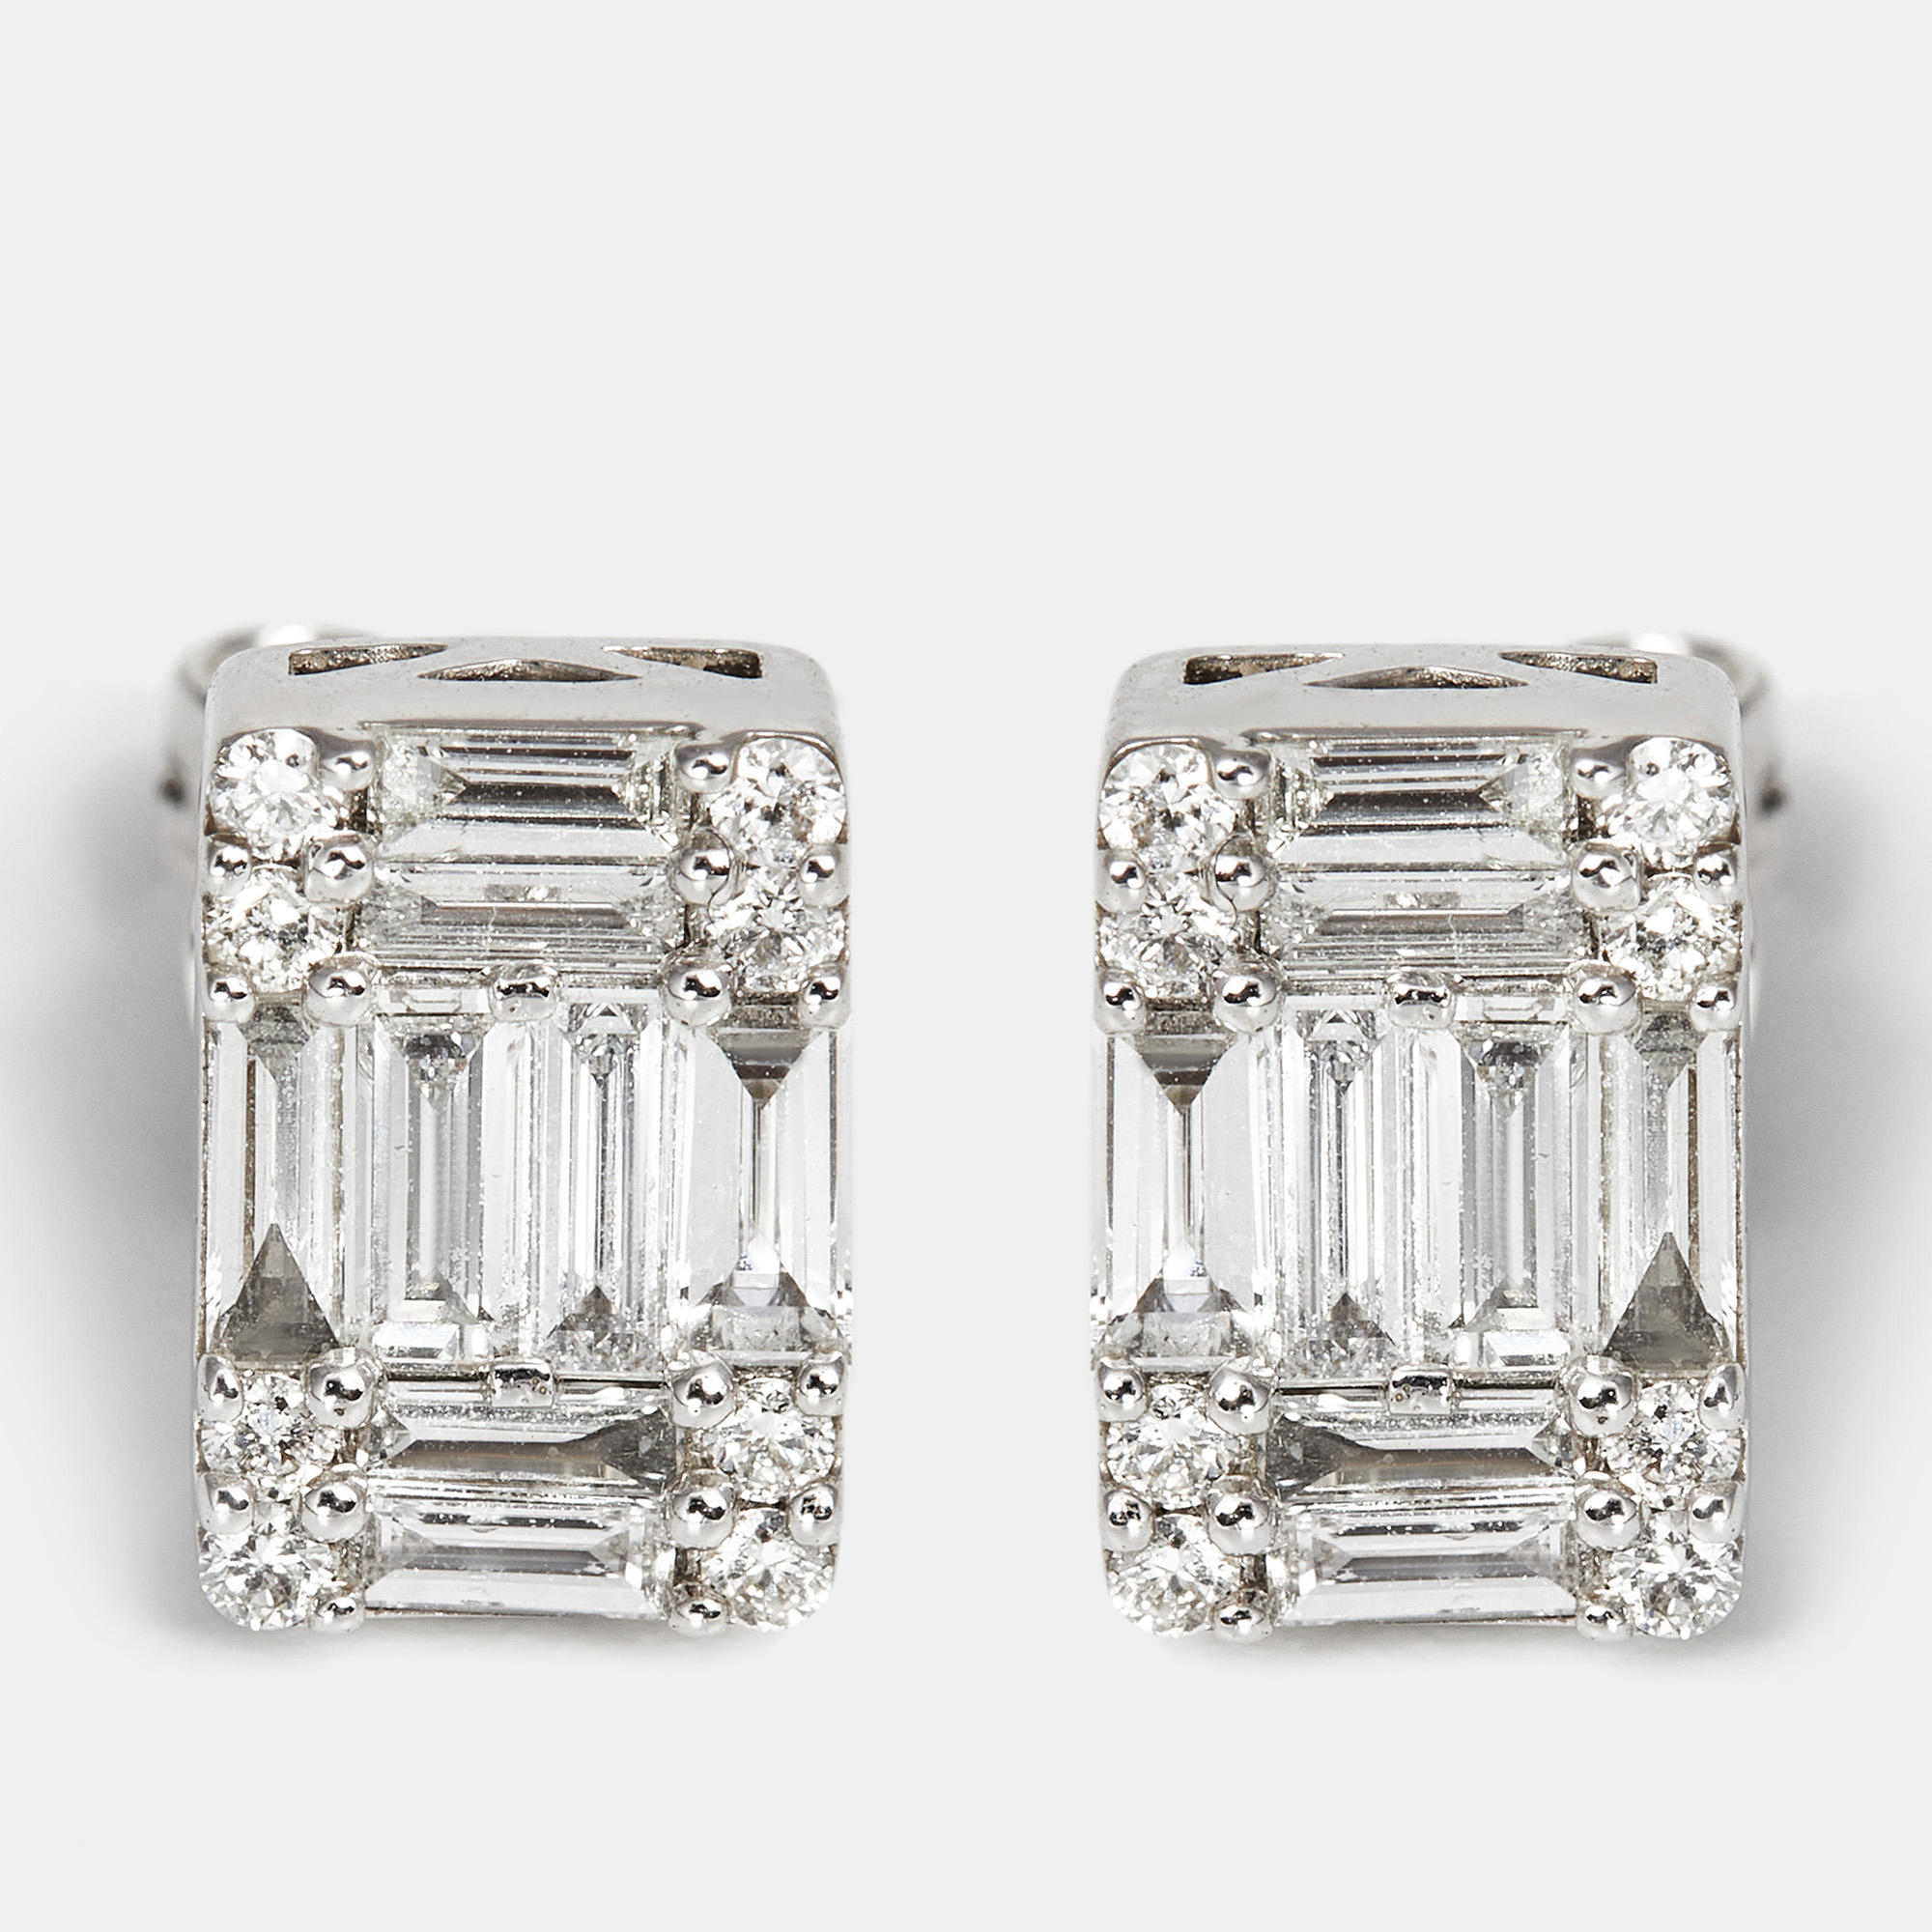 The diamond edit 18k white gold baguette and round cut diamond 0.63 cts 18k white gold stud earrings